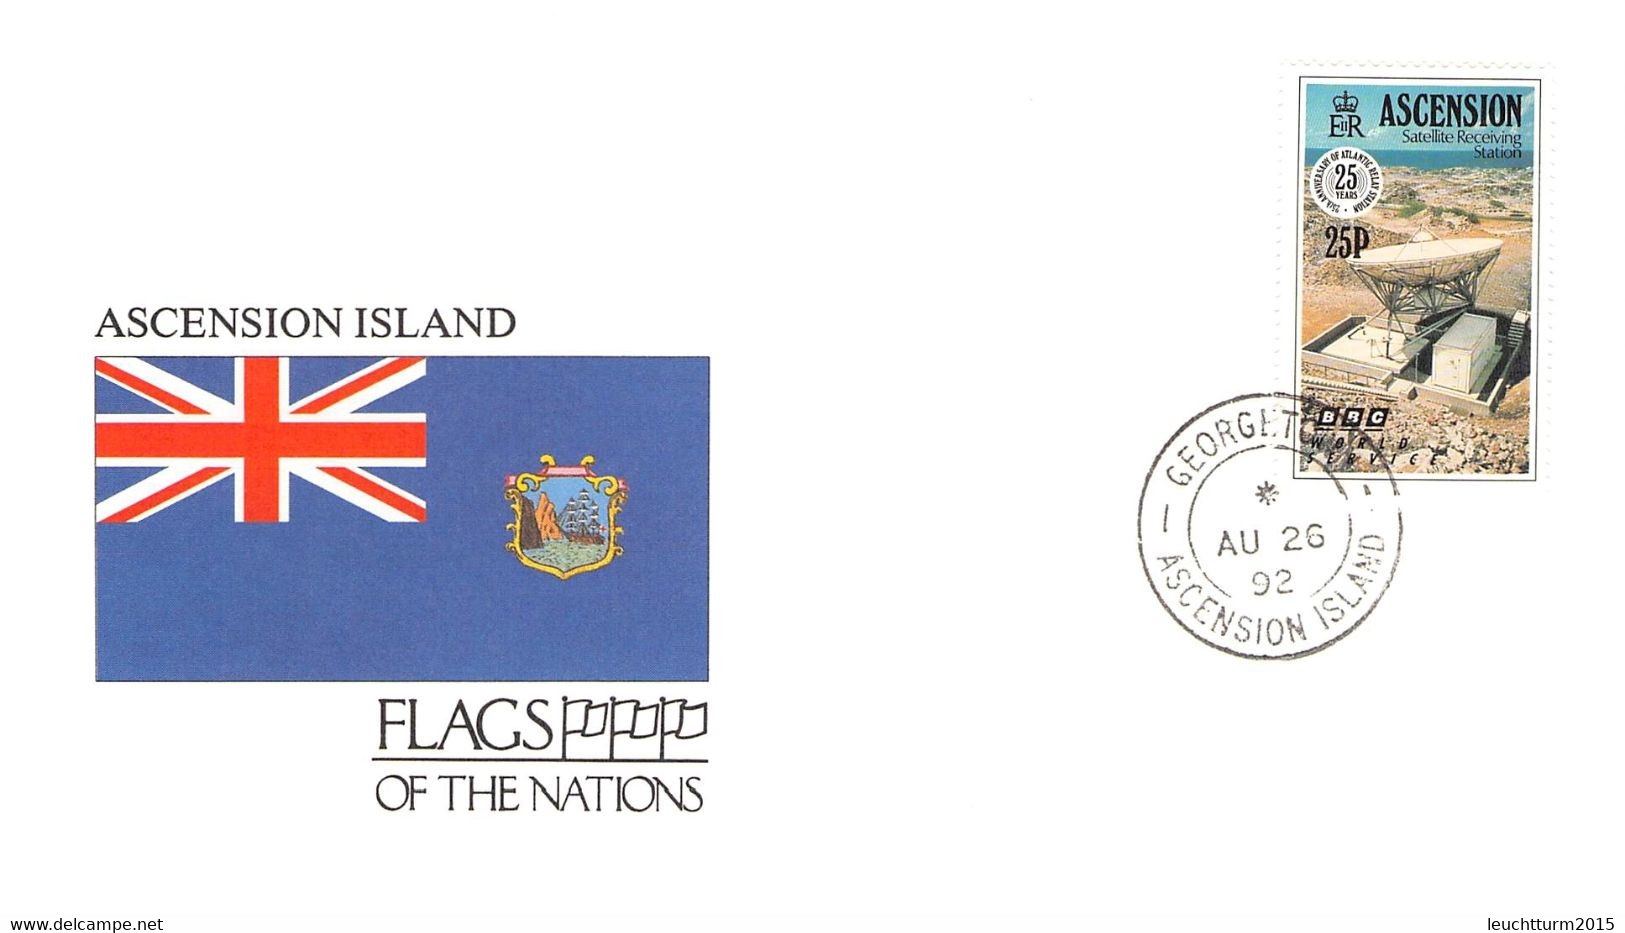 FLAGS OF THE NATIONS - COLLECTION OF COVERS FROM 43 DIFF. STATES WITH FLAGS AND STAMPS / Kiste - Covers